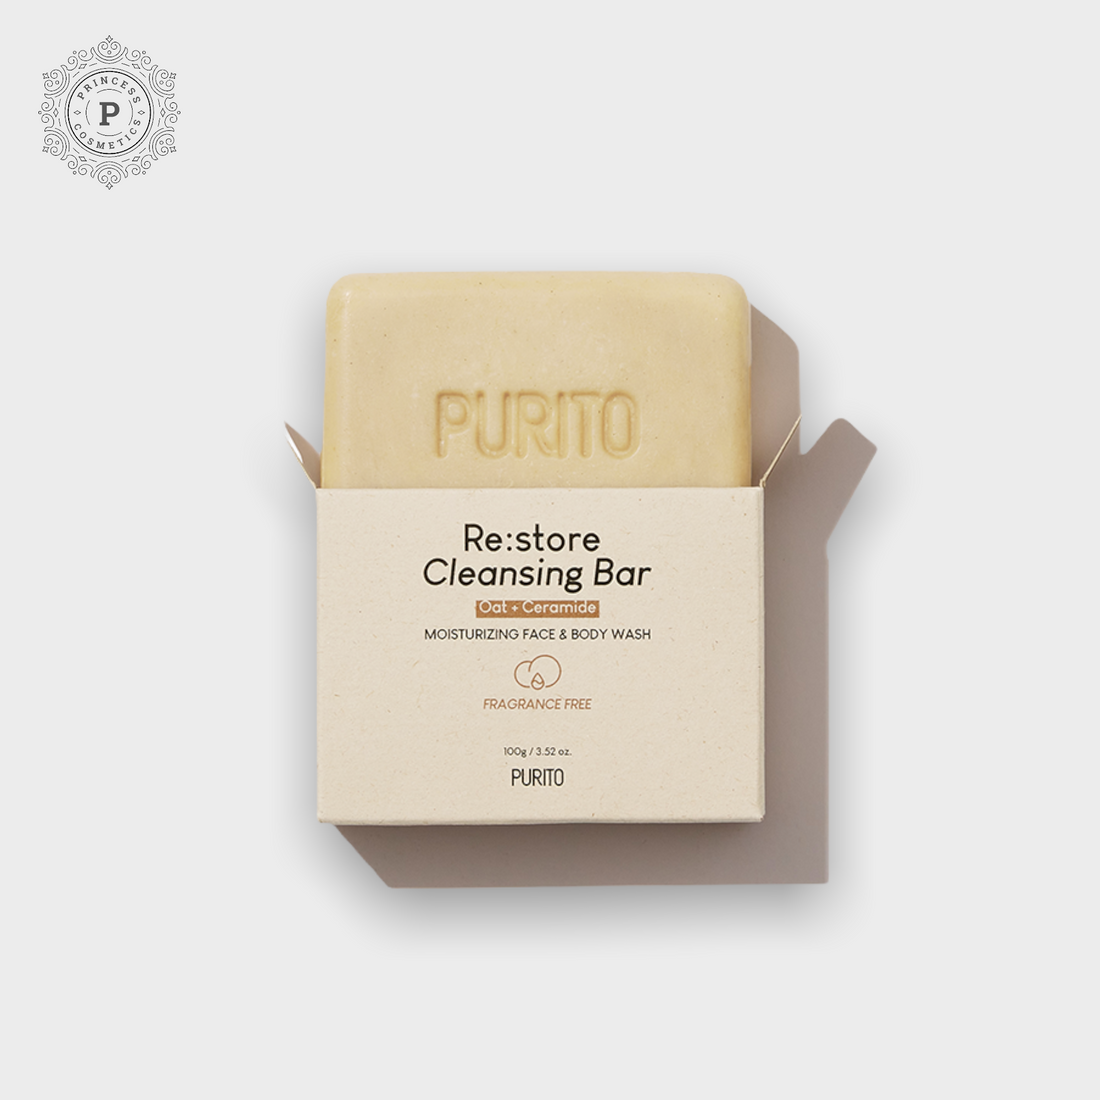 Purito Re:store Cleansing Bar 100g